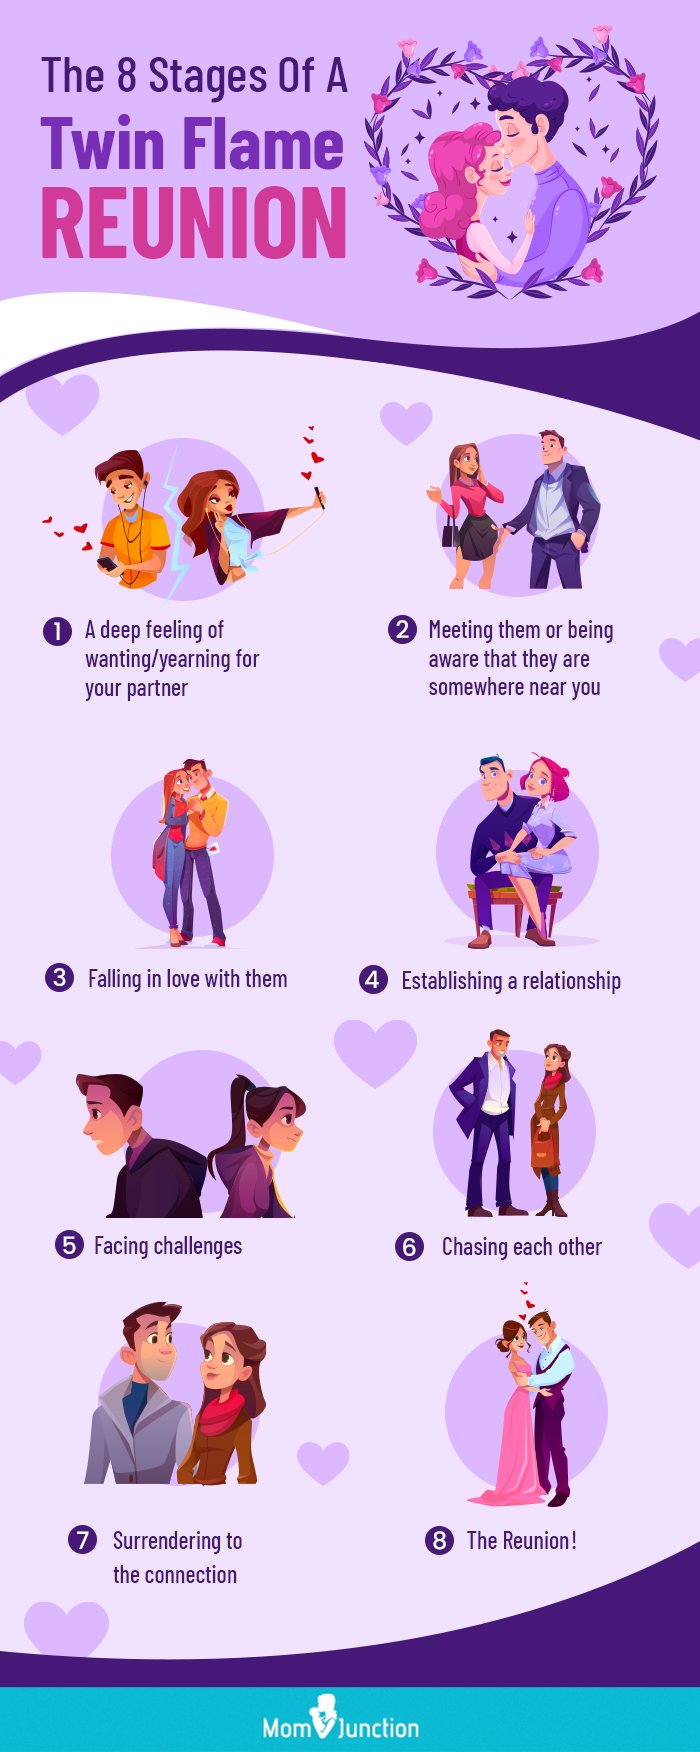 10 Signs Of Twin Flame Connection That Will Open Your Eyes